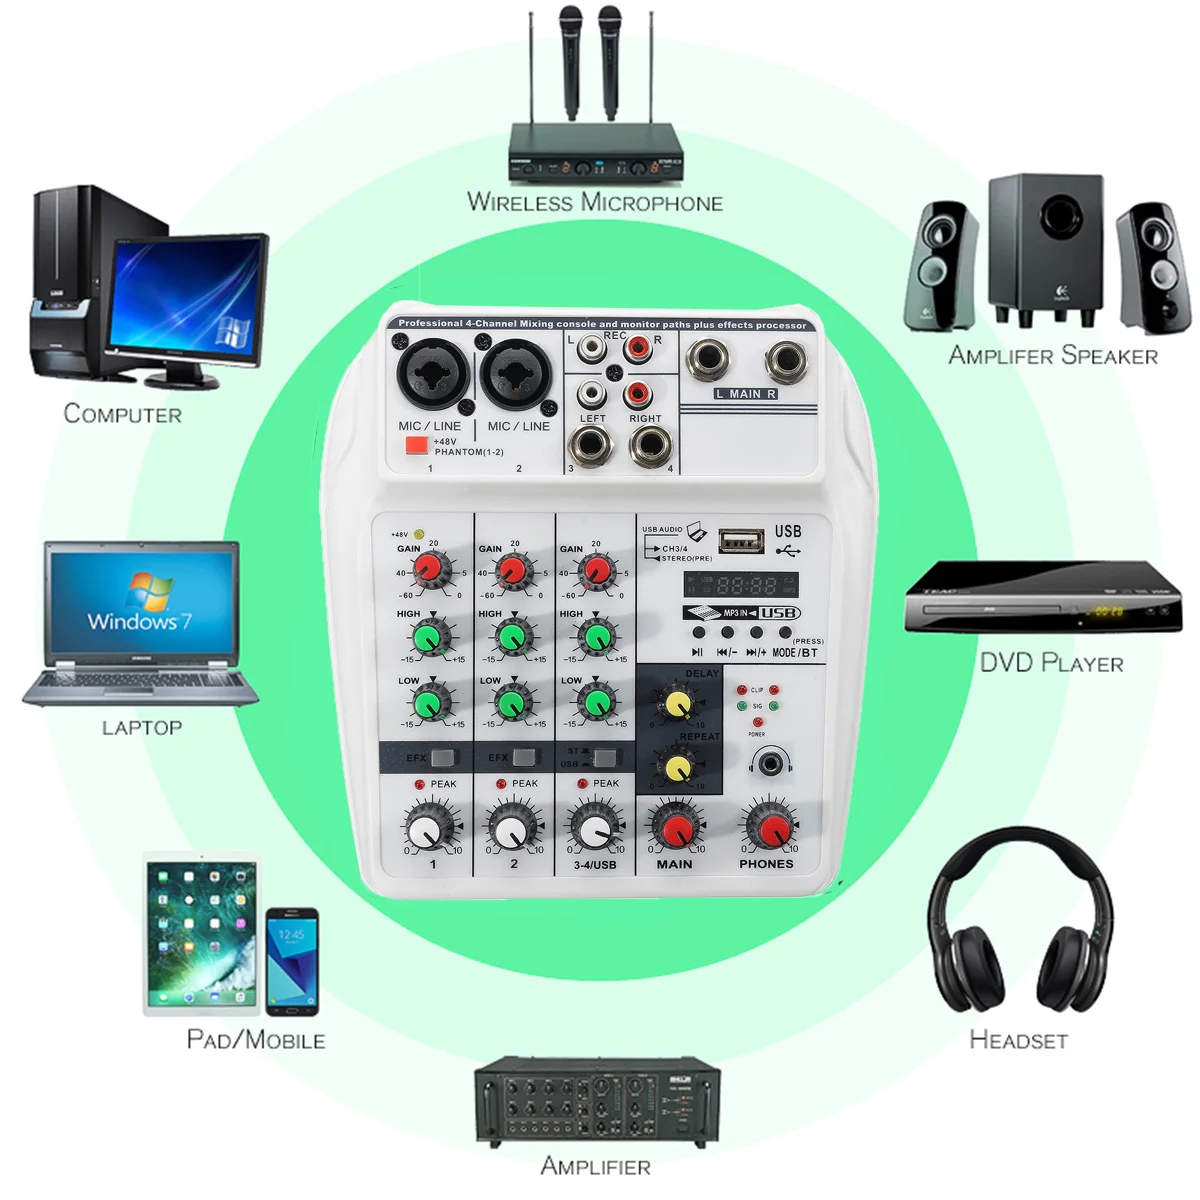 4 Channel bluetooth Sound Mixing Console Record 48V Phantom Power Monitor Professional USB Audio Mixer for Home KTV Studio